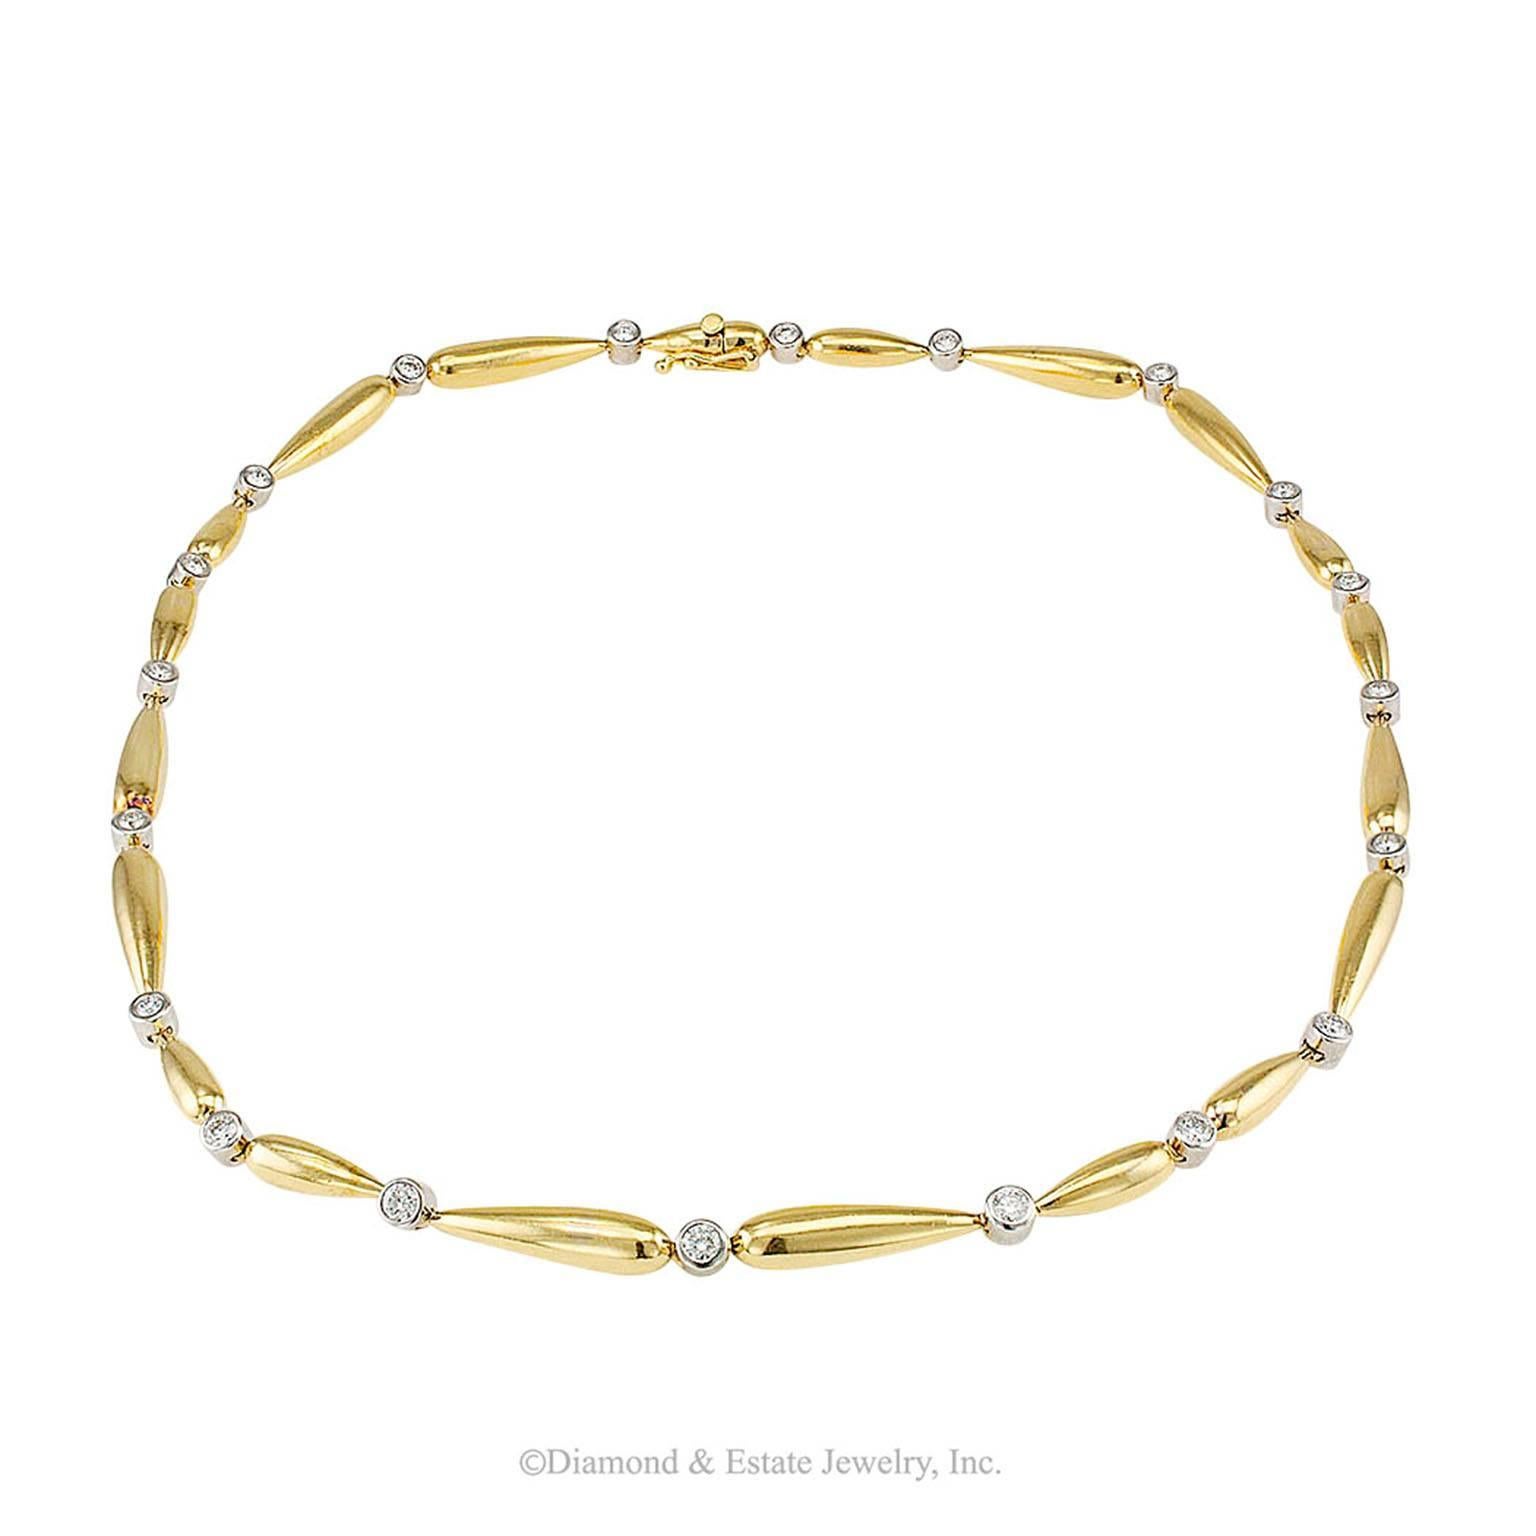 1980s Two Tone Gold Diamond Collar

Two-tone 18-karat gold and diamond articulated collar circa 1980.  The design is composed by a series of elongated, teardrop-shaped yellow gold sections connected by round diamonds bezel-set in white gold.  The